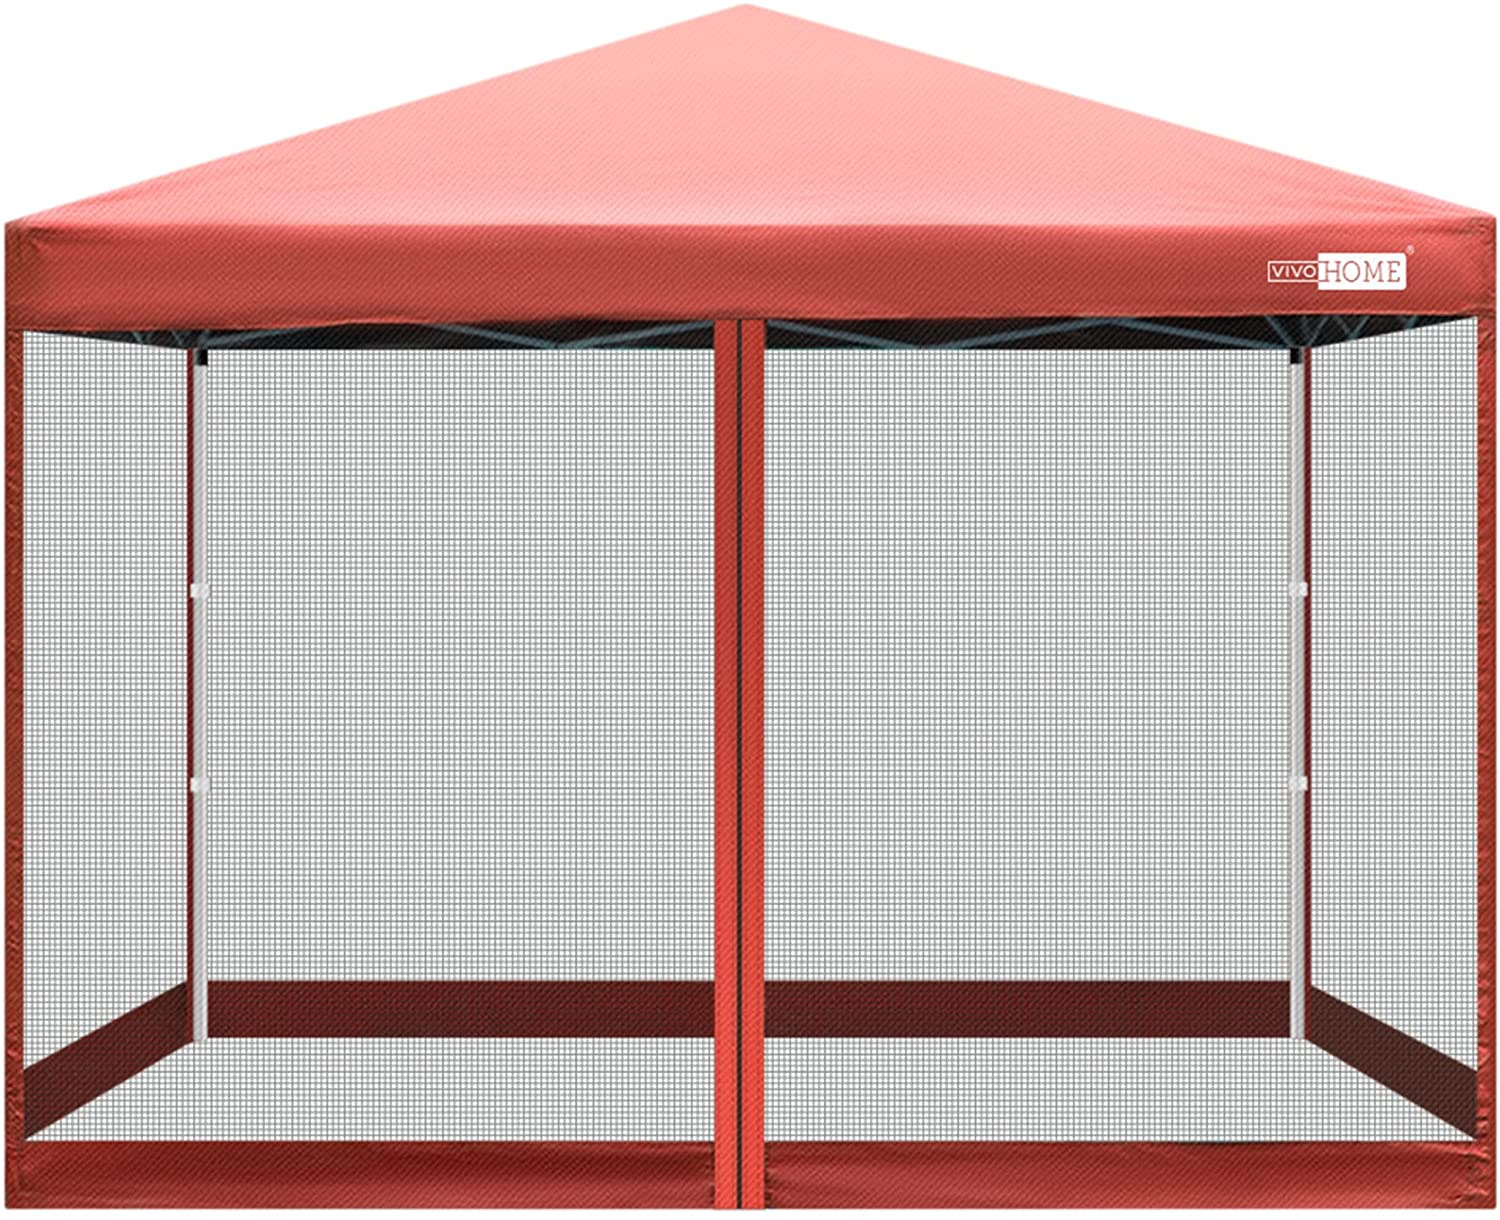 210D Oxford Outdoor Easy Pop up Canopy Screen Party Tent with Mesh Side Walls Re